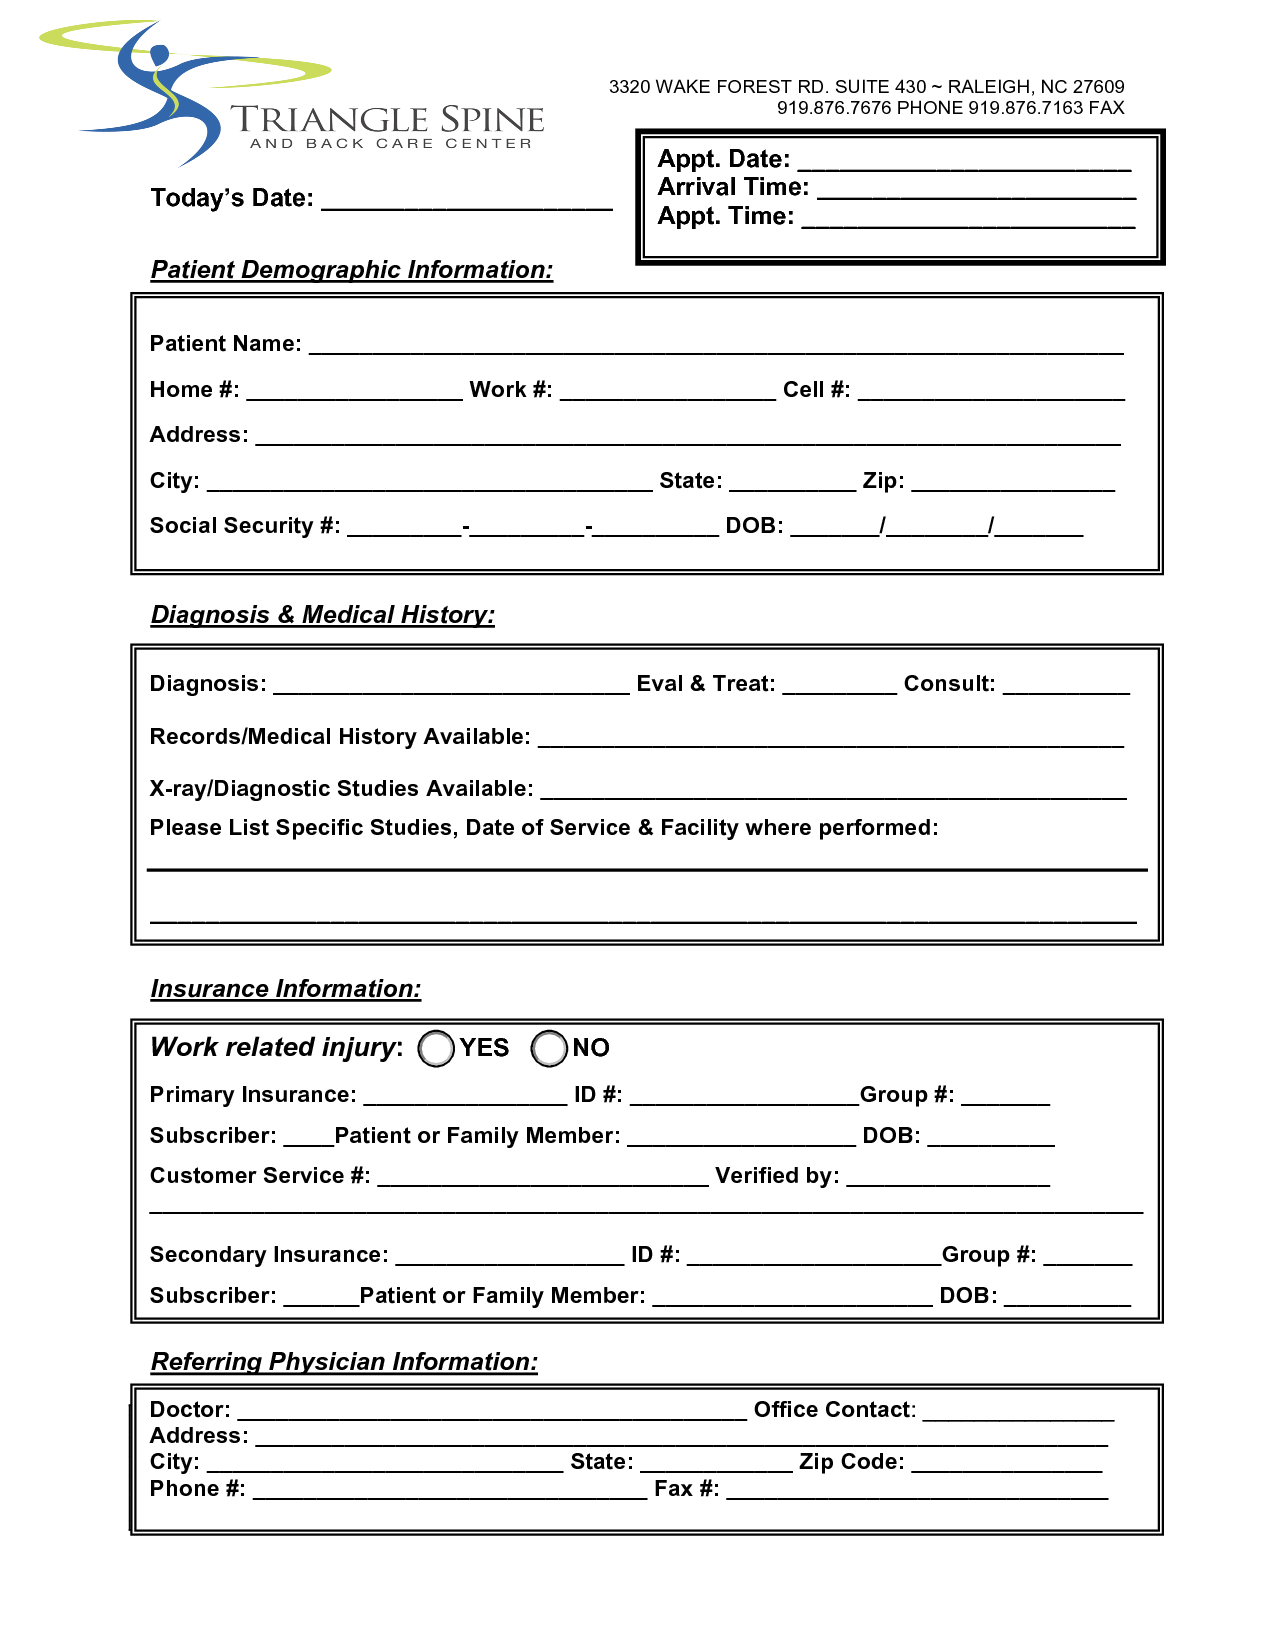 Medical Referral Forms Template from clipart-library.com